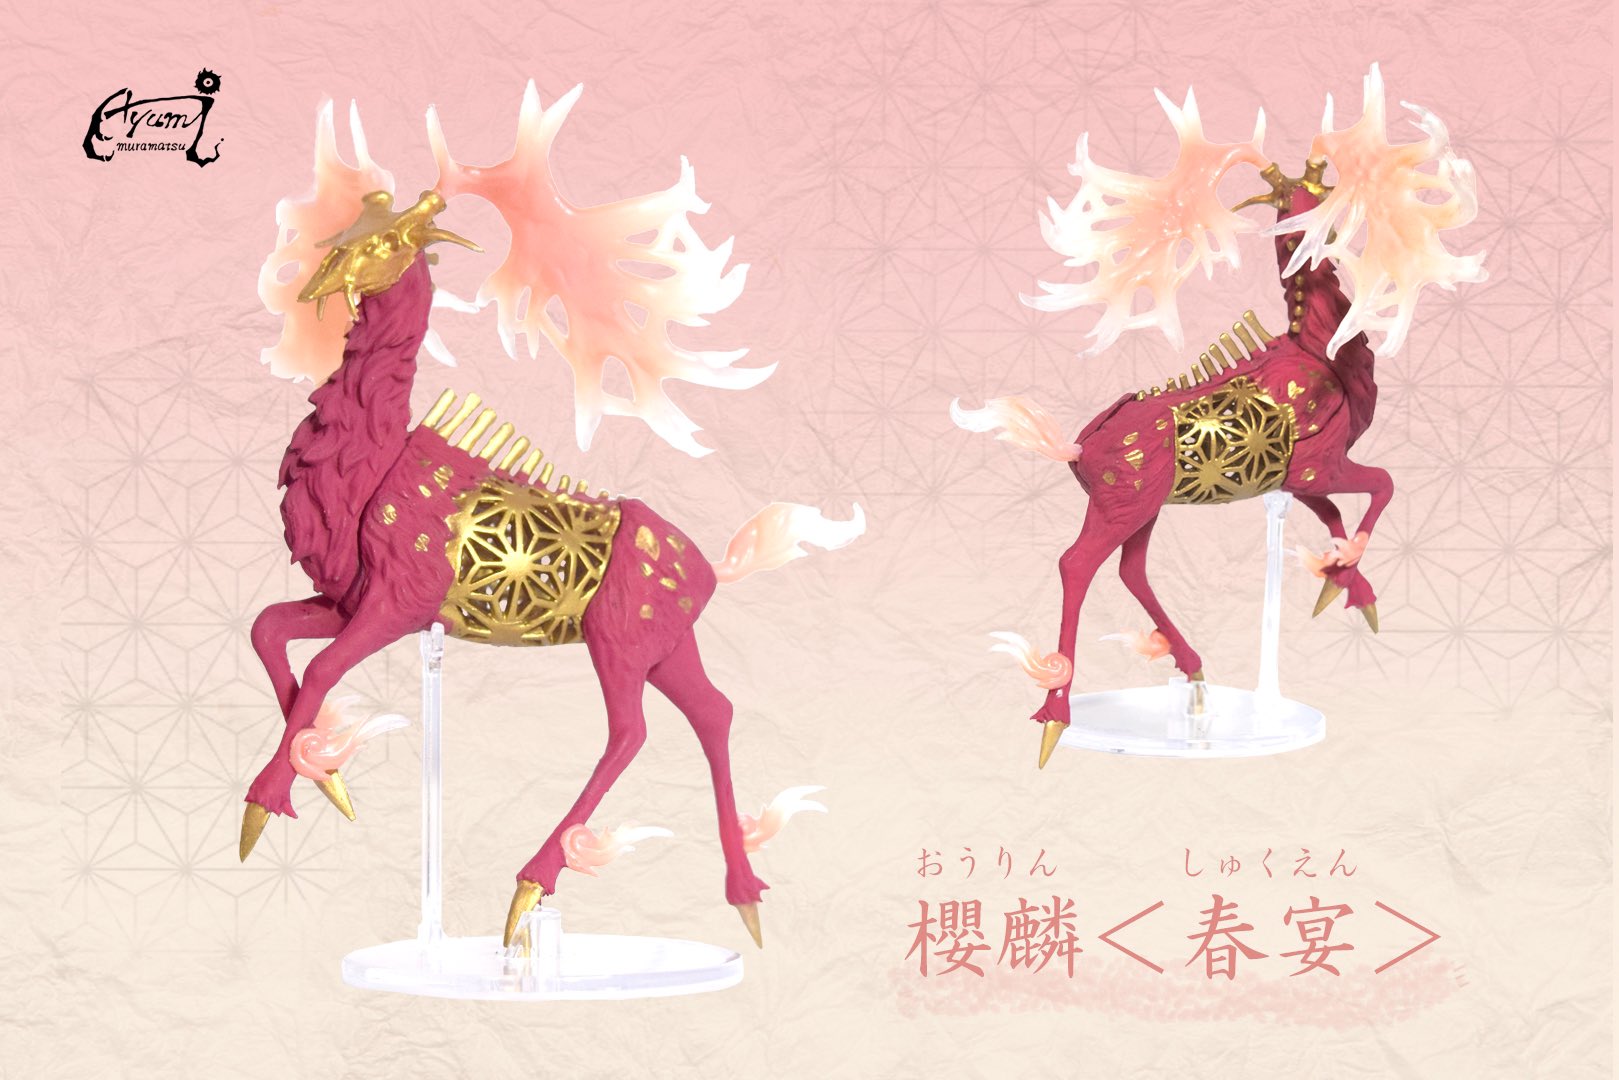 A blind box art toy: Shenlu Four Seasons Gacha Series. Horse statue in pink and gold. Design request available. From Strangecat Toys.